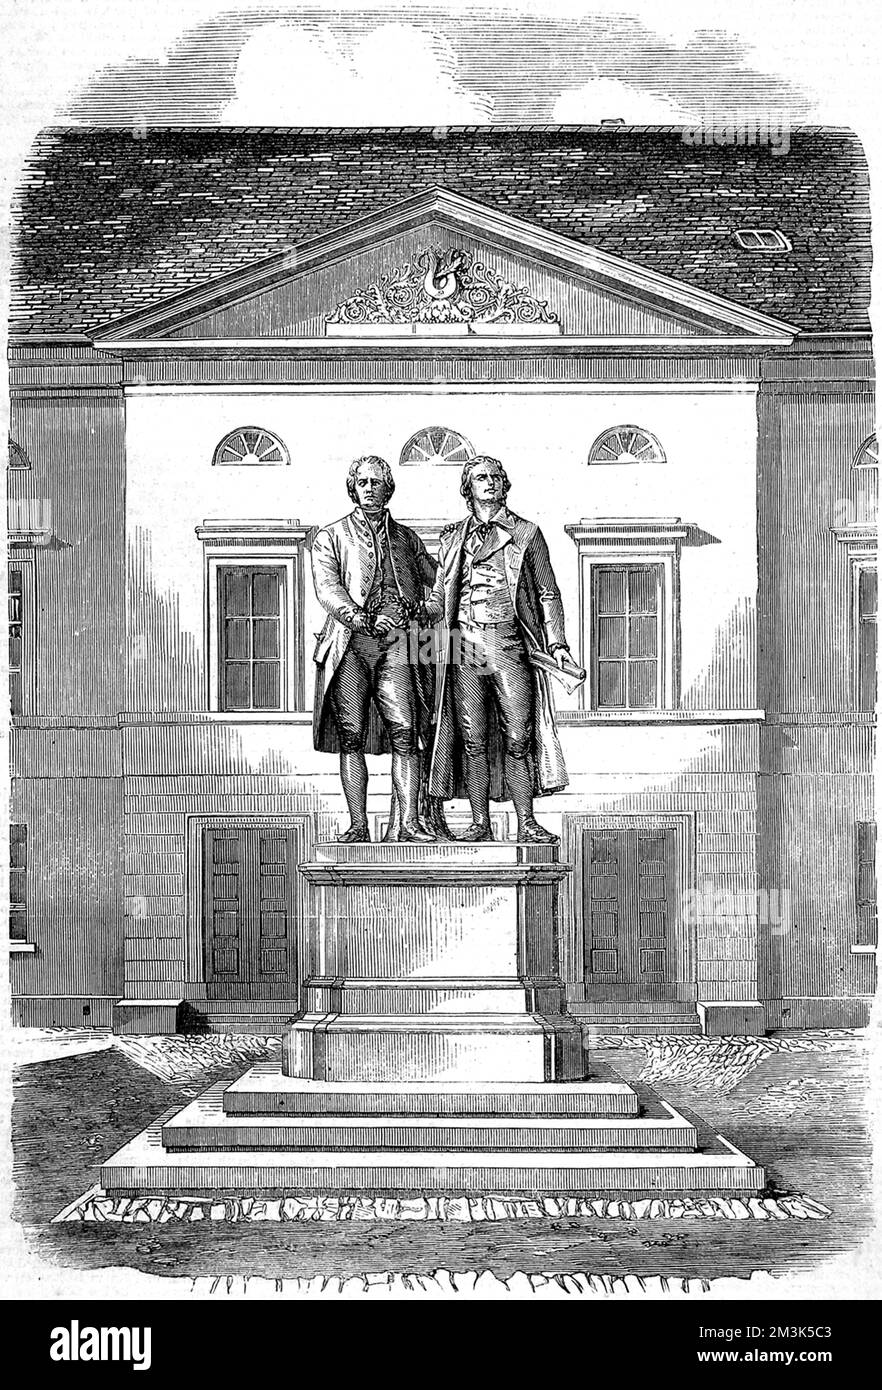 The joint statue of Johann Wolfgang von Goethe (1749 - 1832), and Friedrich Schiller (1759 - 1805), the German writers, at Weimar, Germany, 1858.  1858 Stock Photo